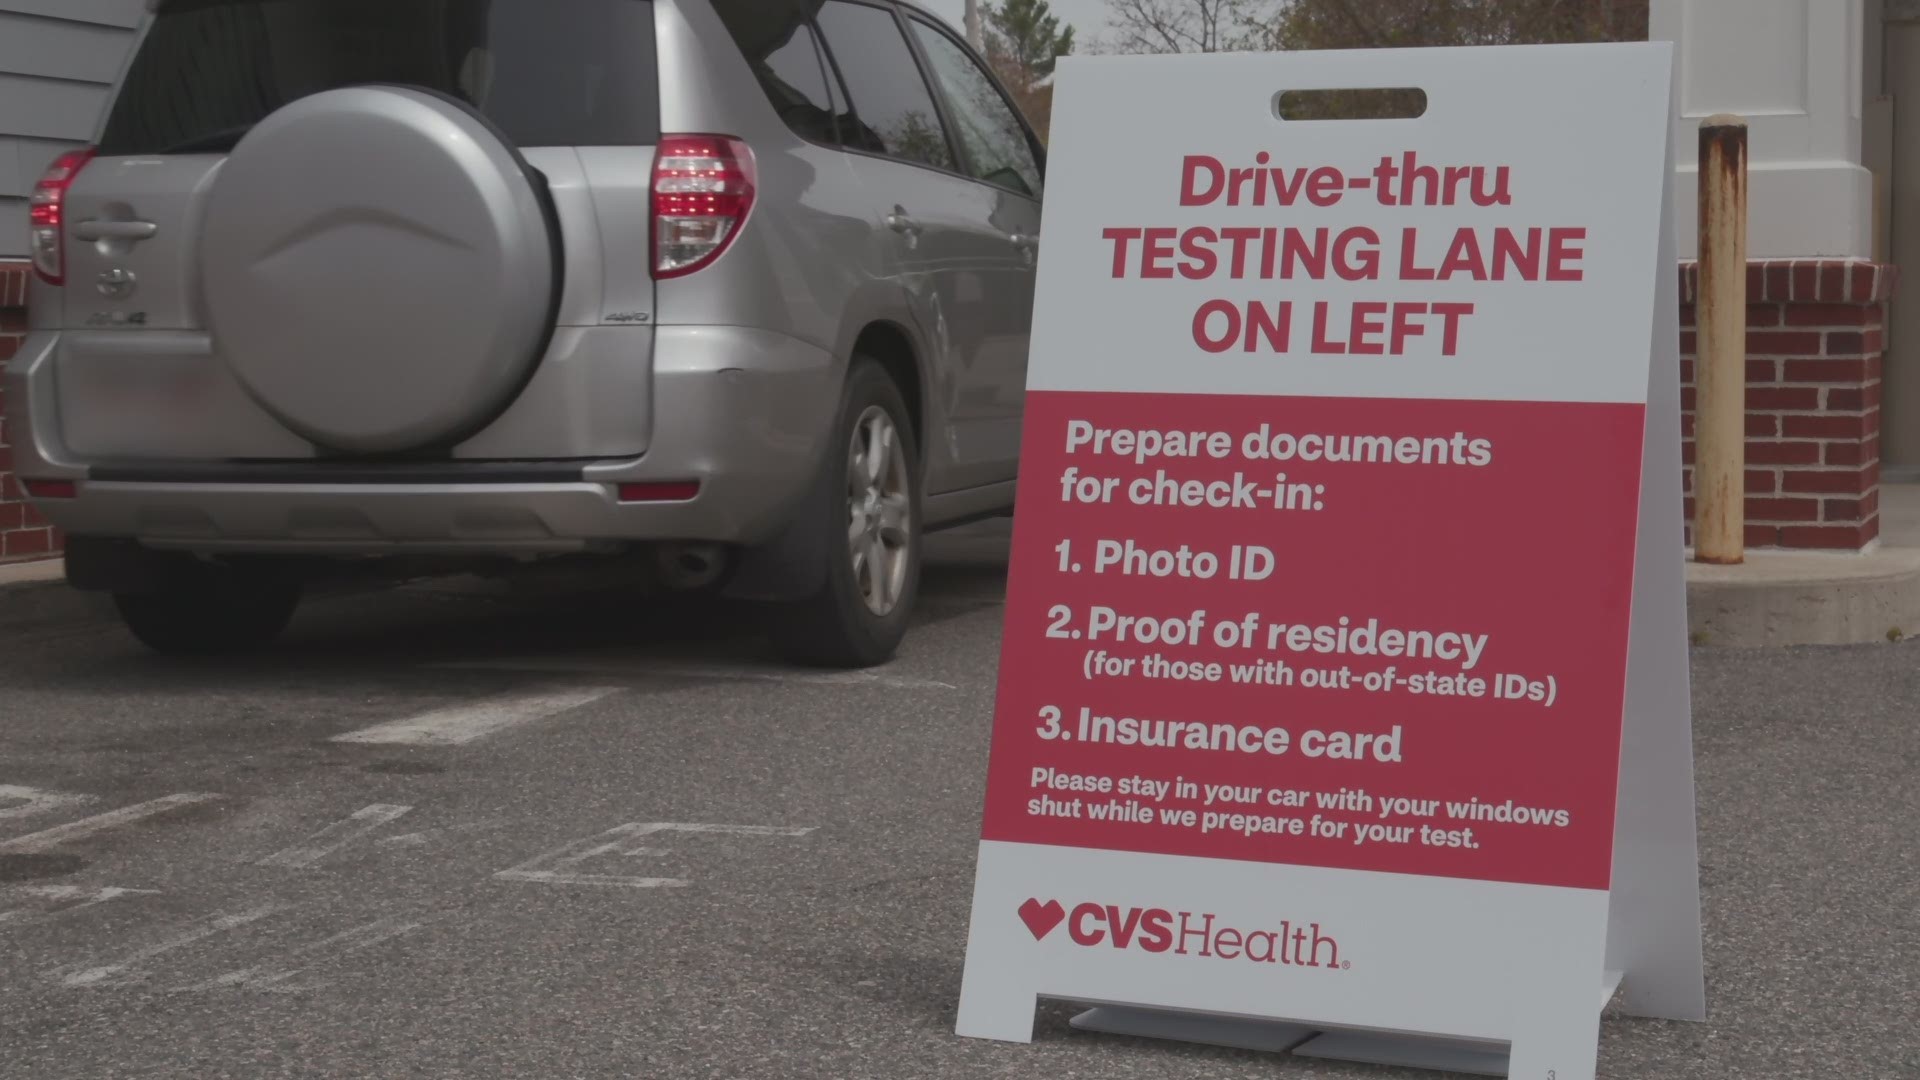 Patients must register in advance at CVS.com beginning Friday, May 22 to schedule an appointment.